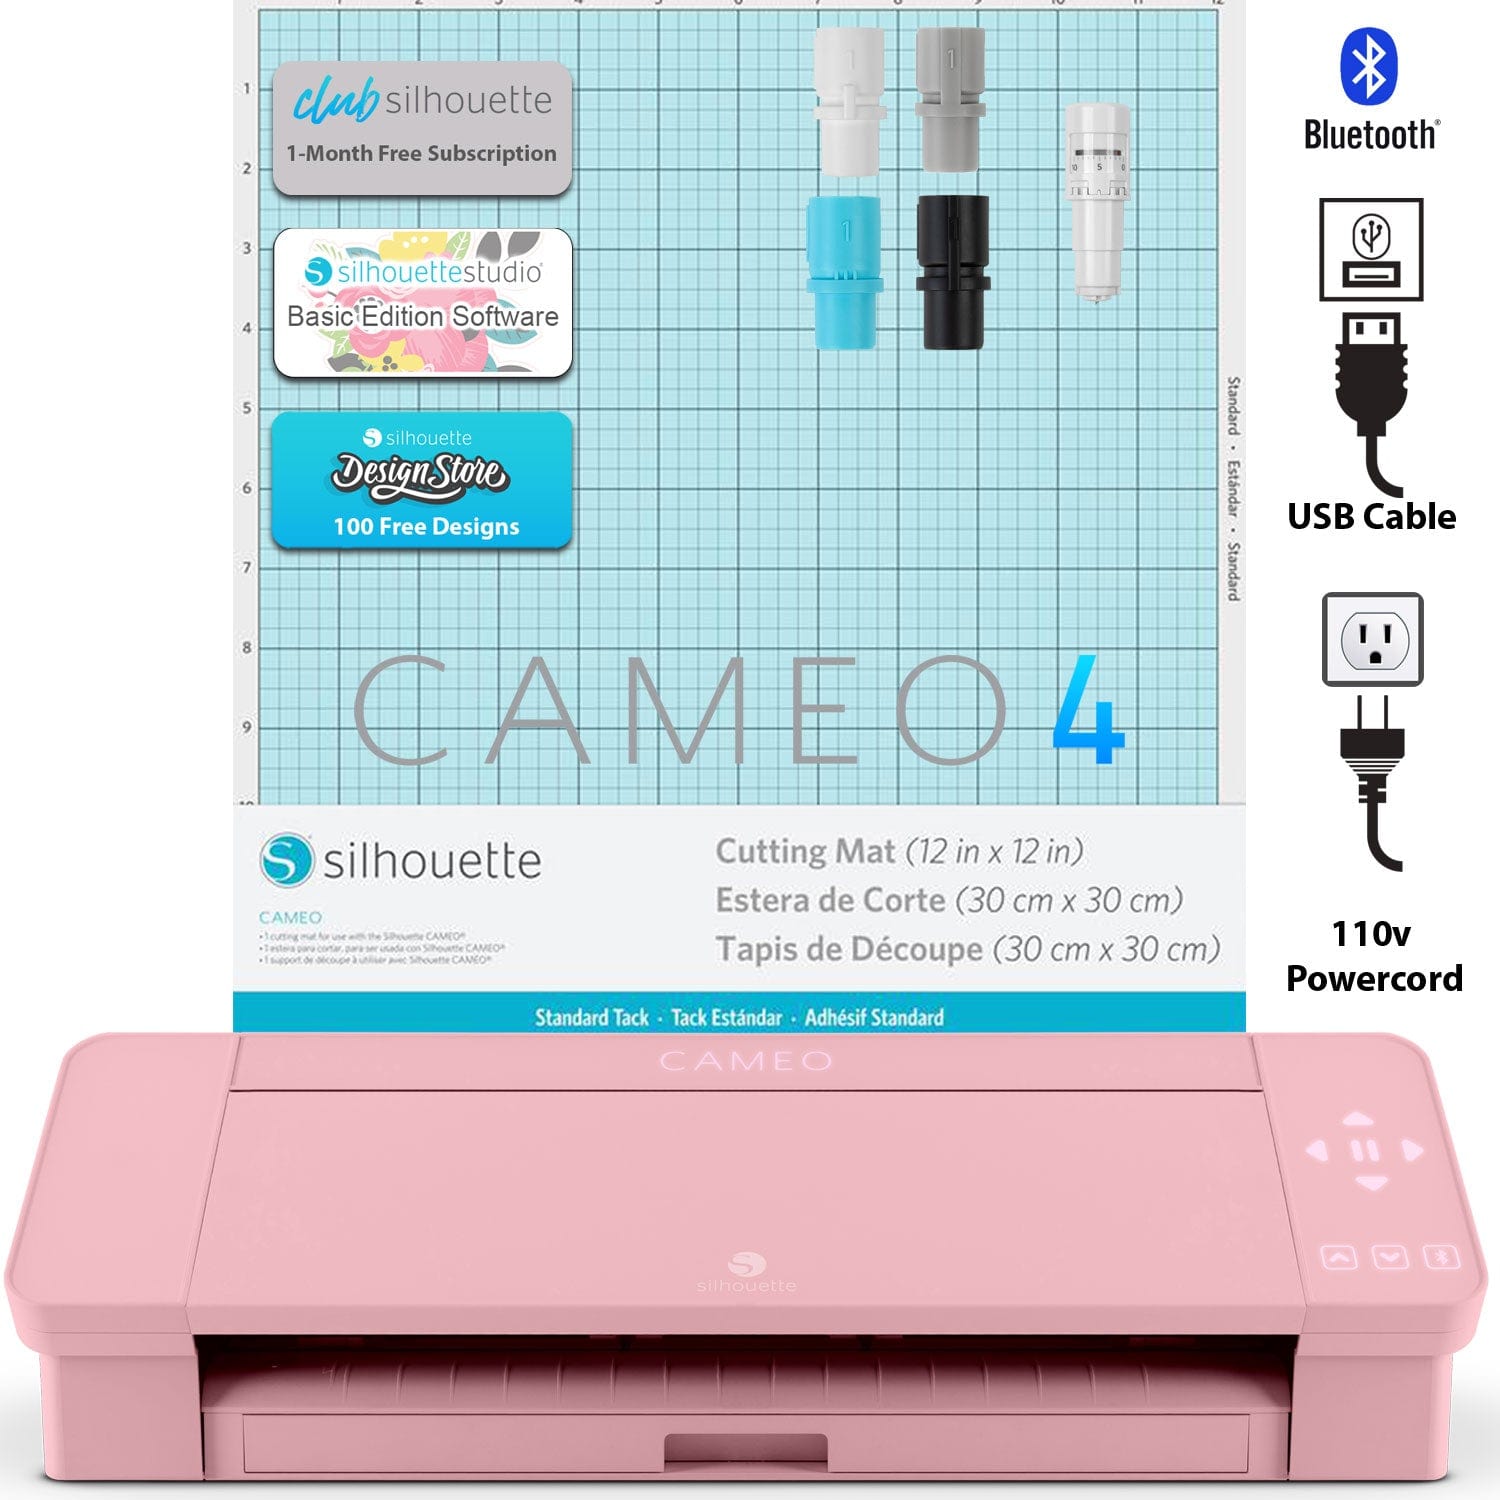 Silhouette America Craft Cutters Silhouette Cameo 4 Vinyl Cutting Machine 12" Pink Edition- Reconditioned